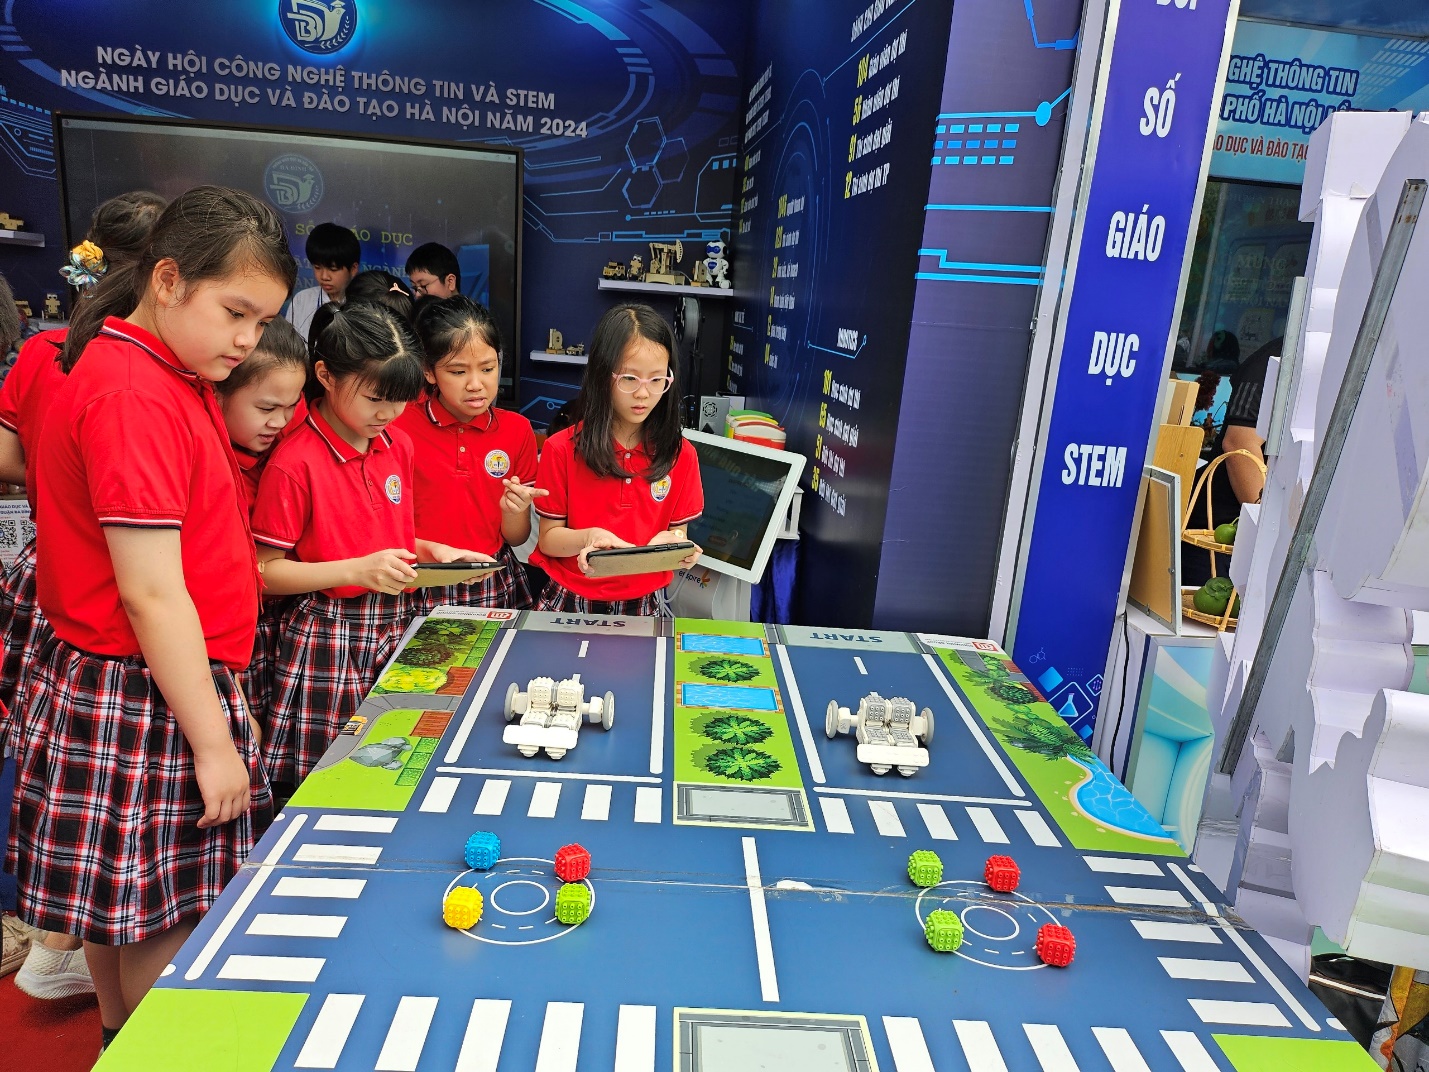 A group of children in red shirts playing a gameDescription automatically generated